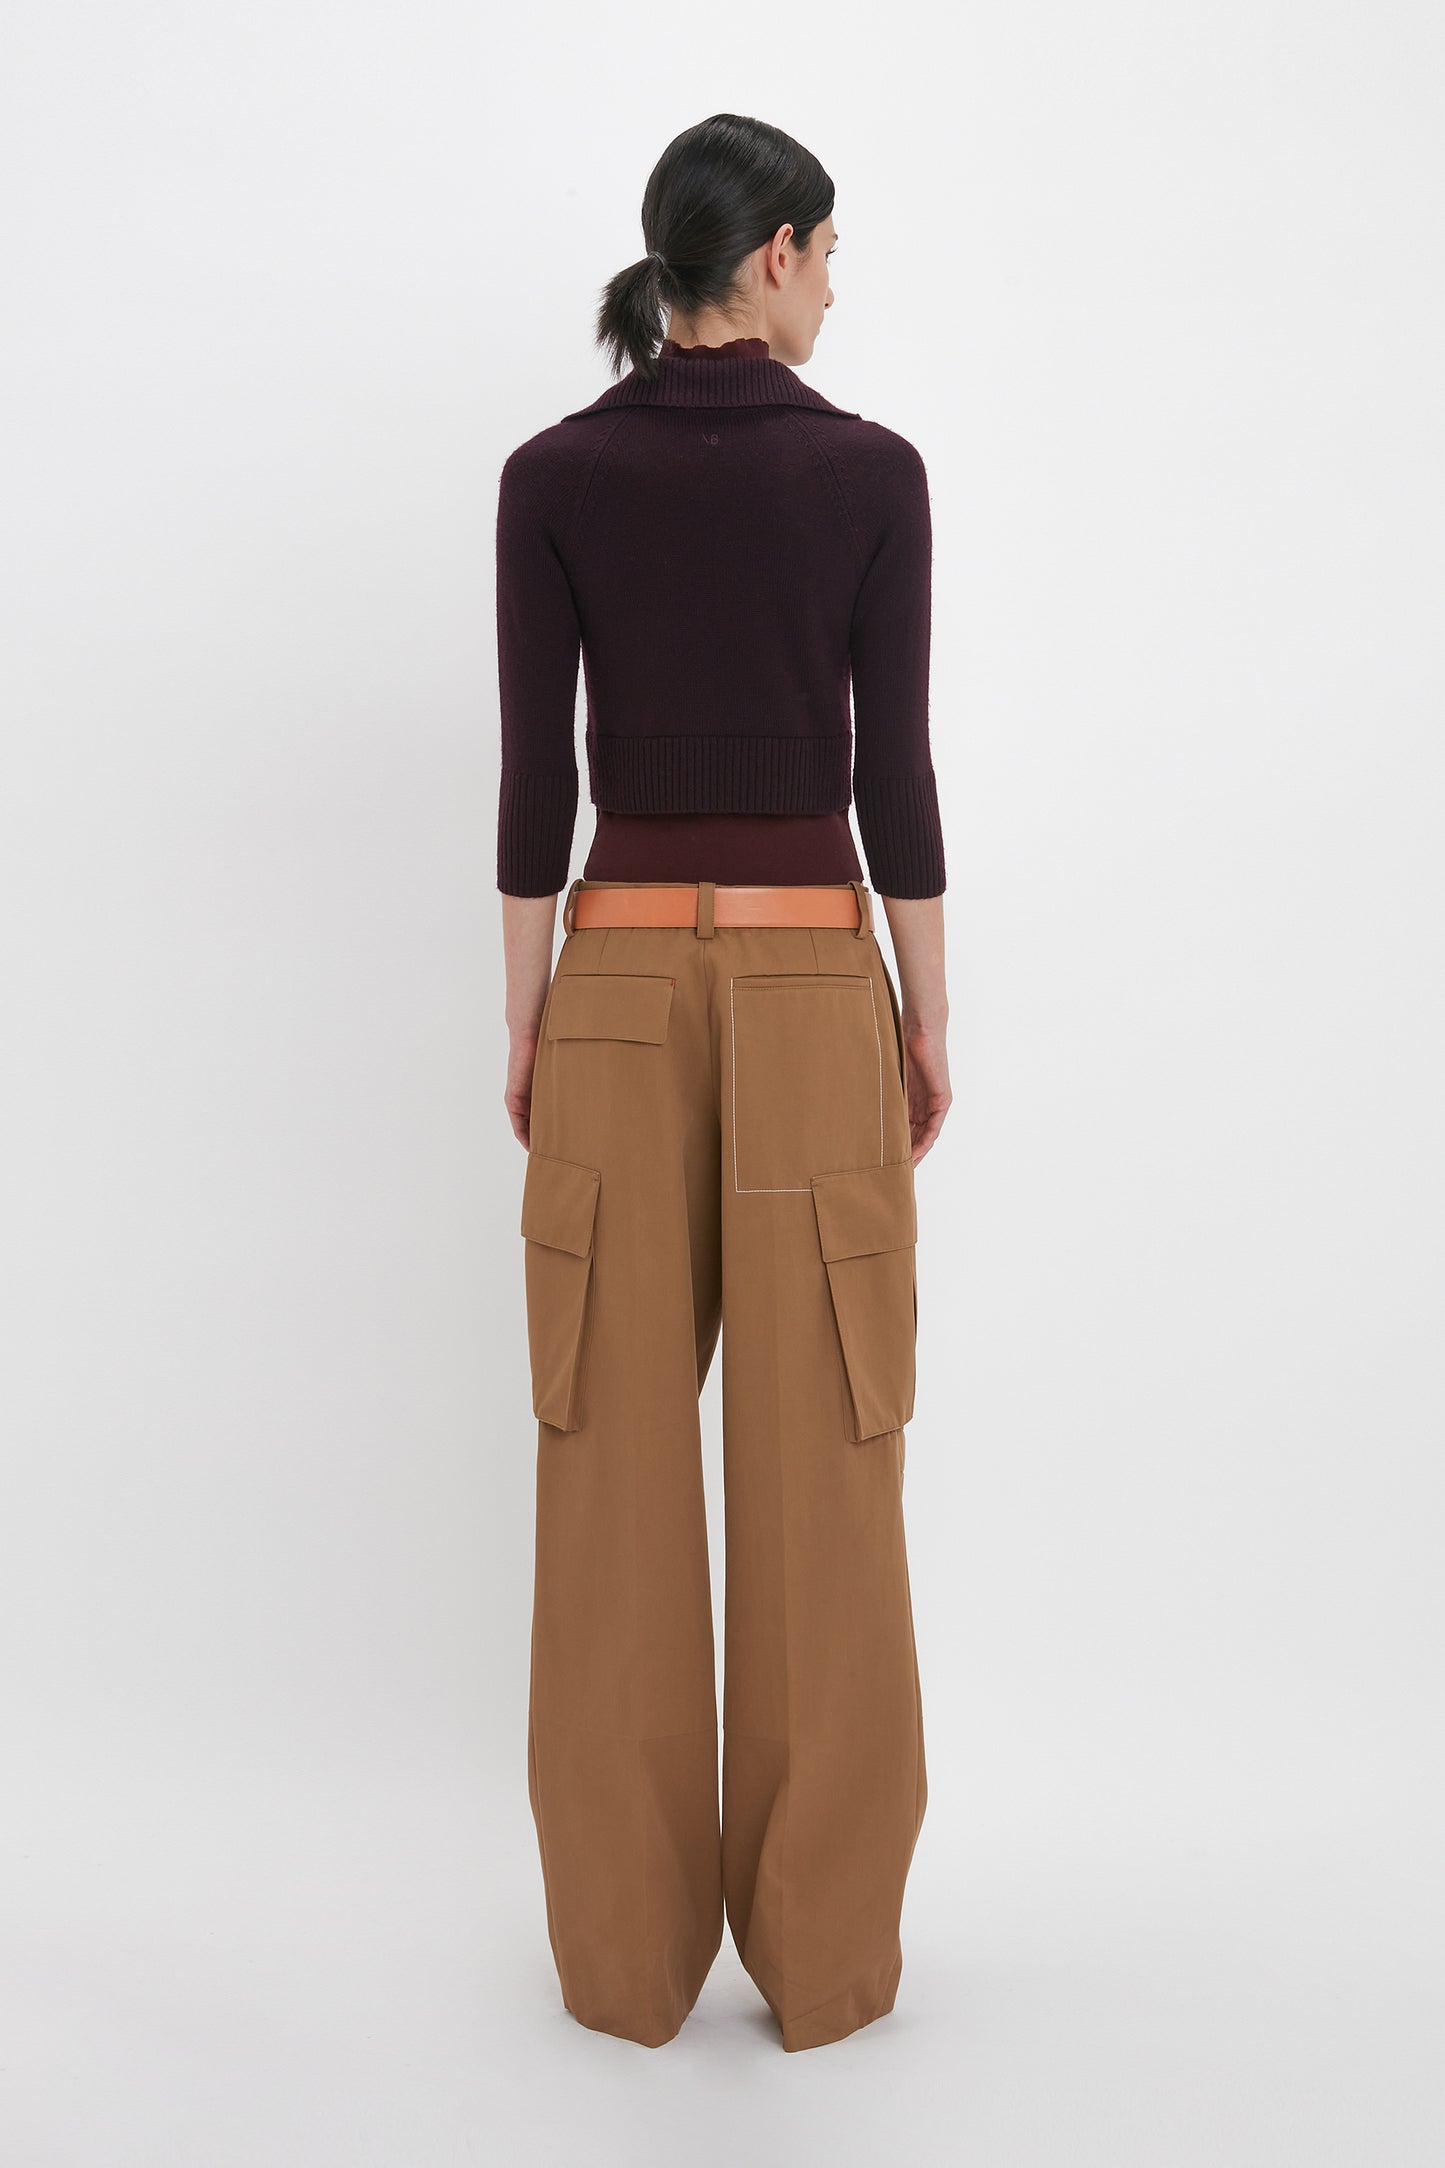 Person standing facing away, wearing a dark luxury knitwear long-sleeve top from Victoria Beckham called the Wrap Detail Jumper In Brown, and high-waisted, wide-leg tan cargo pants with a belt.